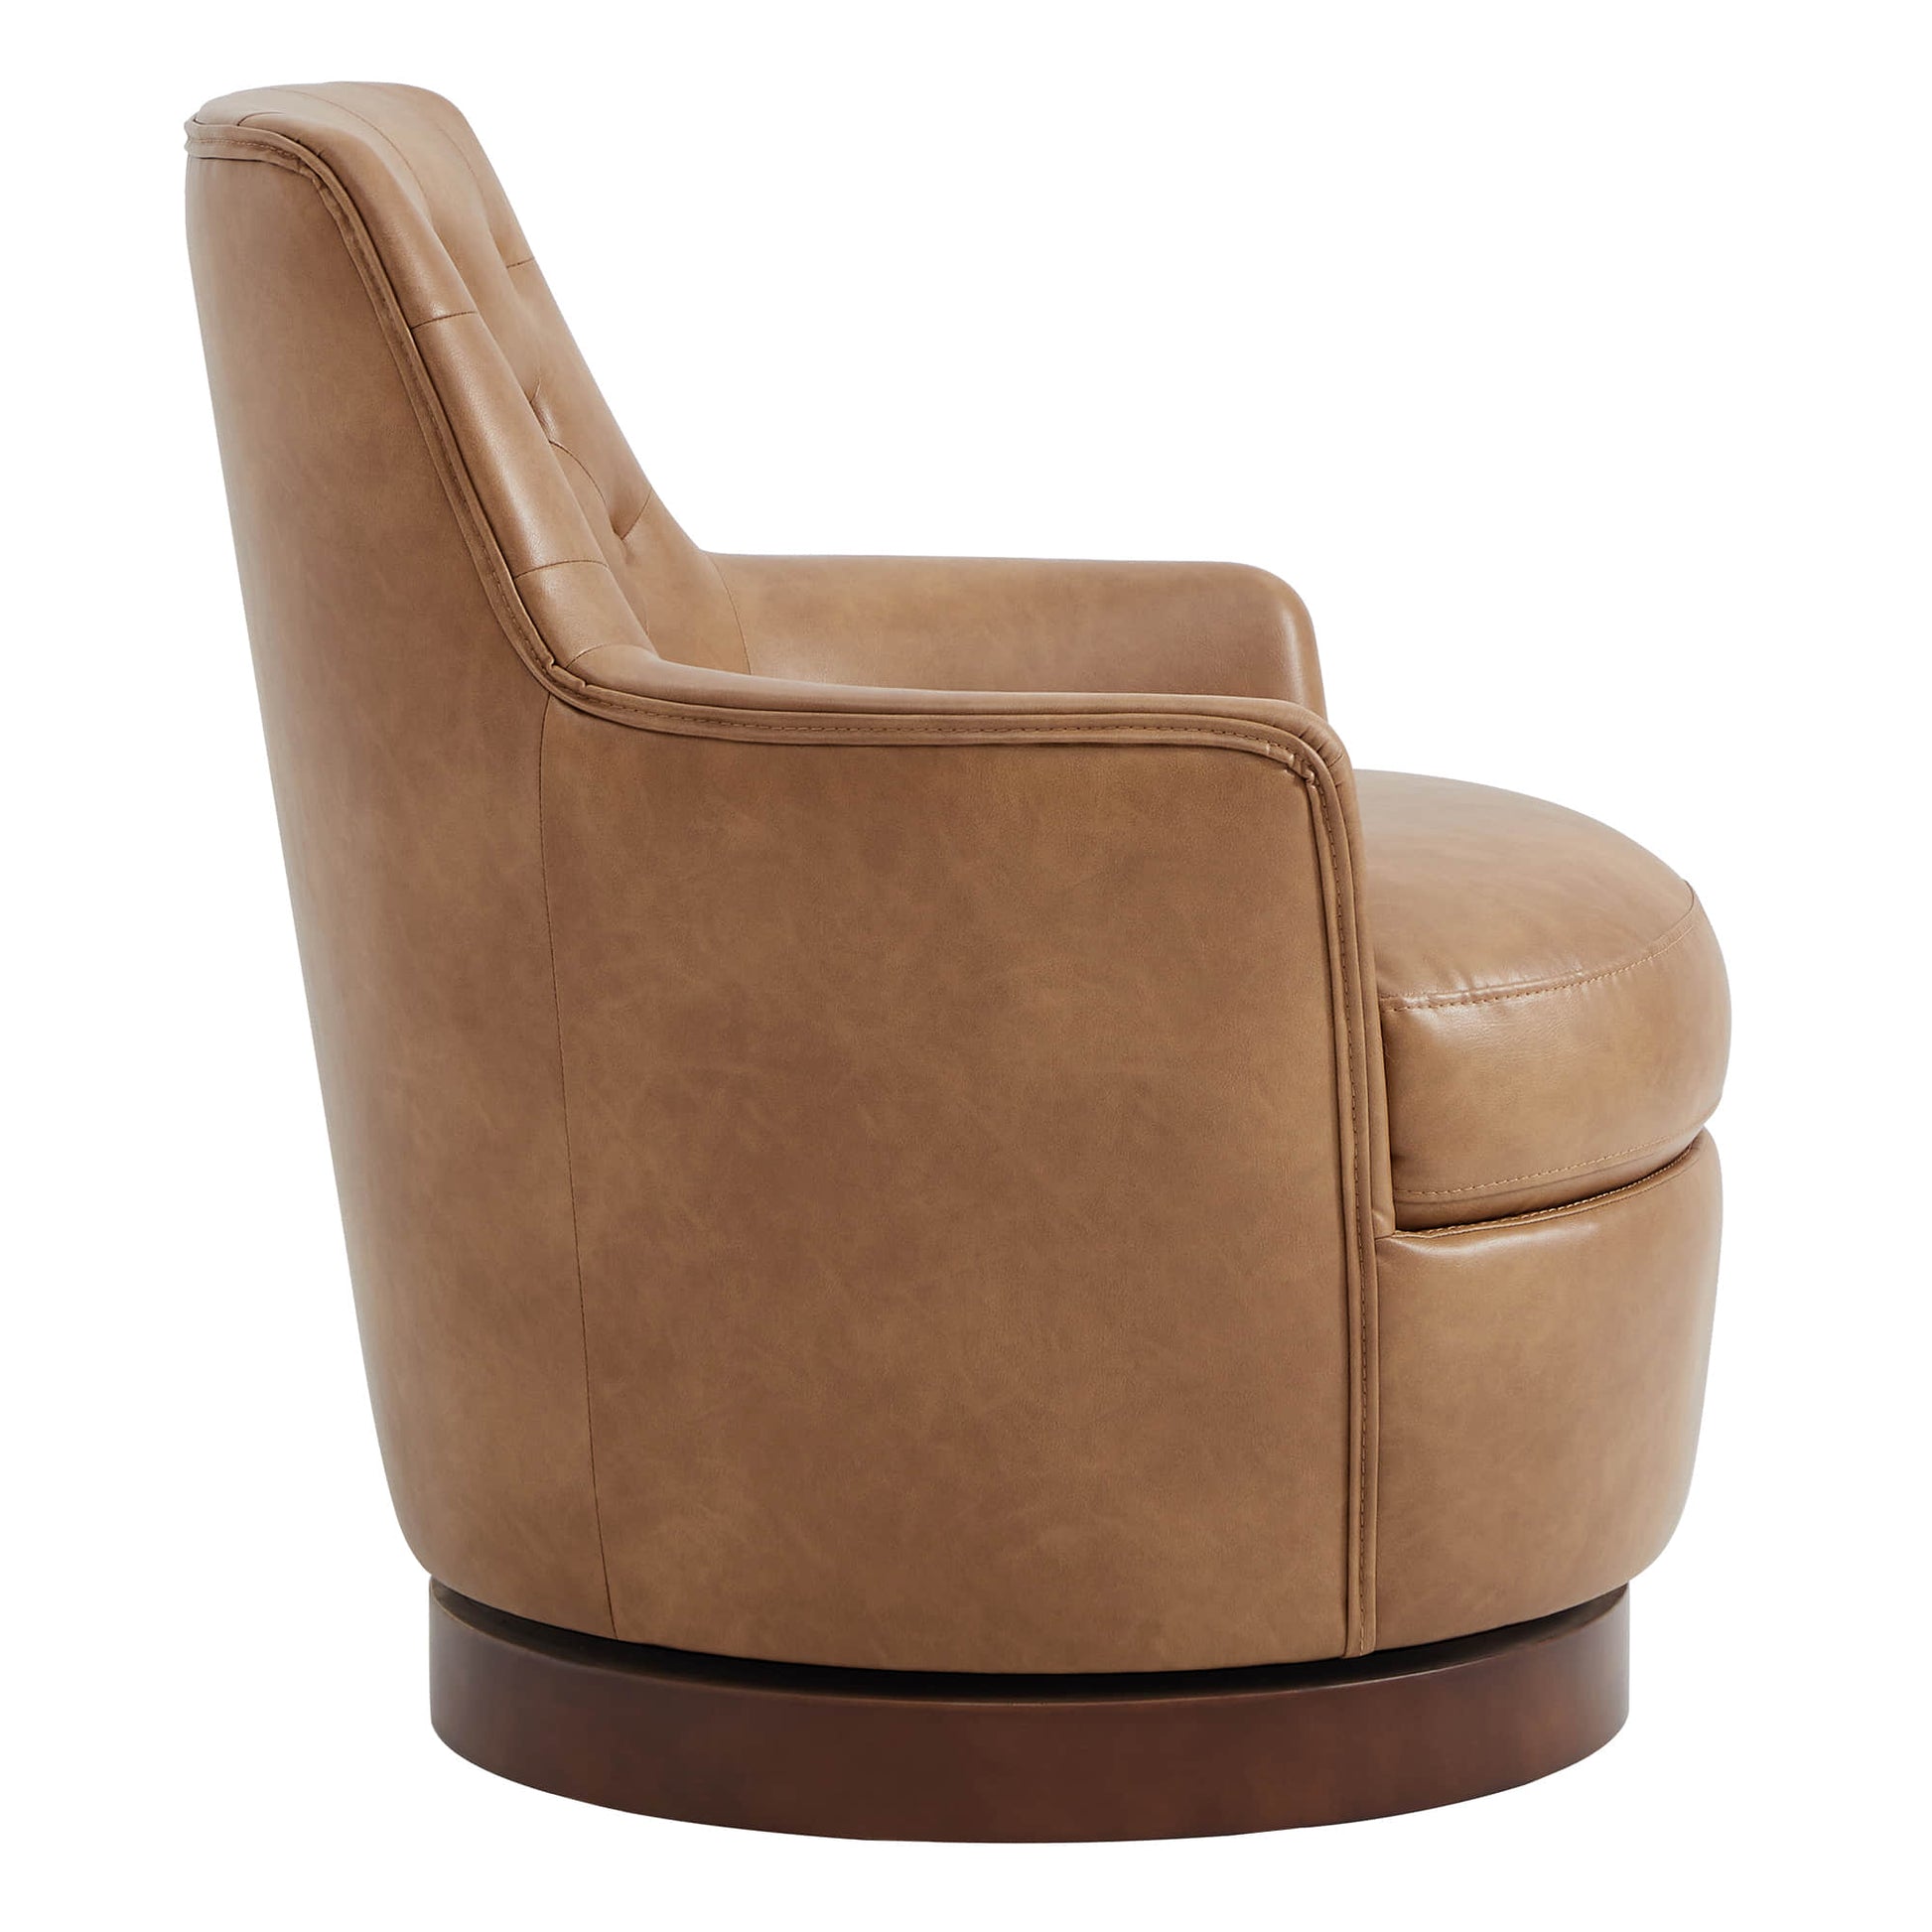 CHITA LIVING-Lindy Tufted Swivel Accent Chair-Accent Chair-Faux Leather-Cognac Brown-